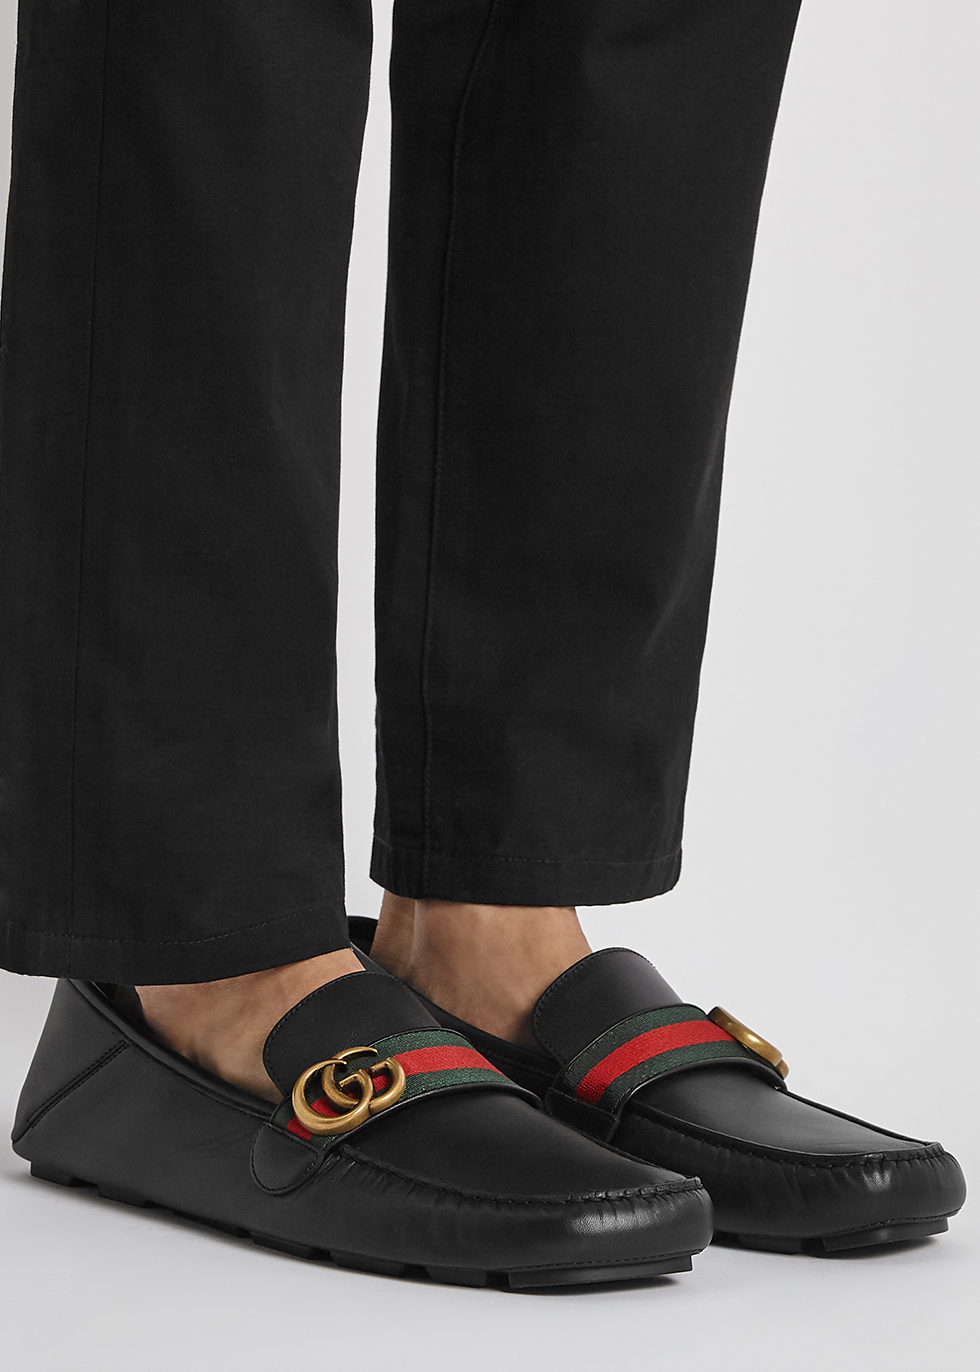 gucci leather driving shoes